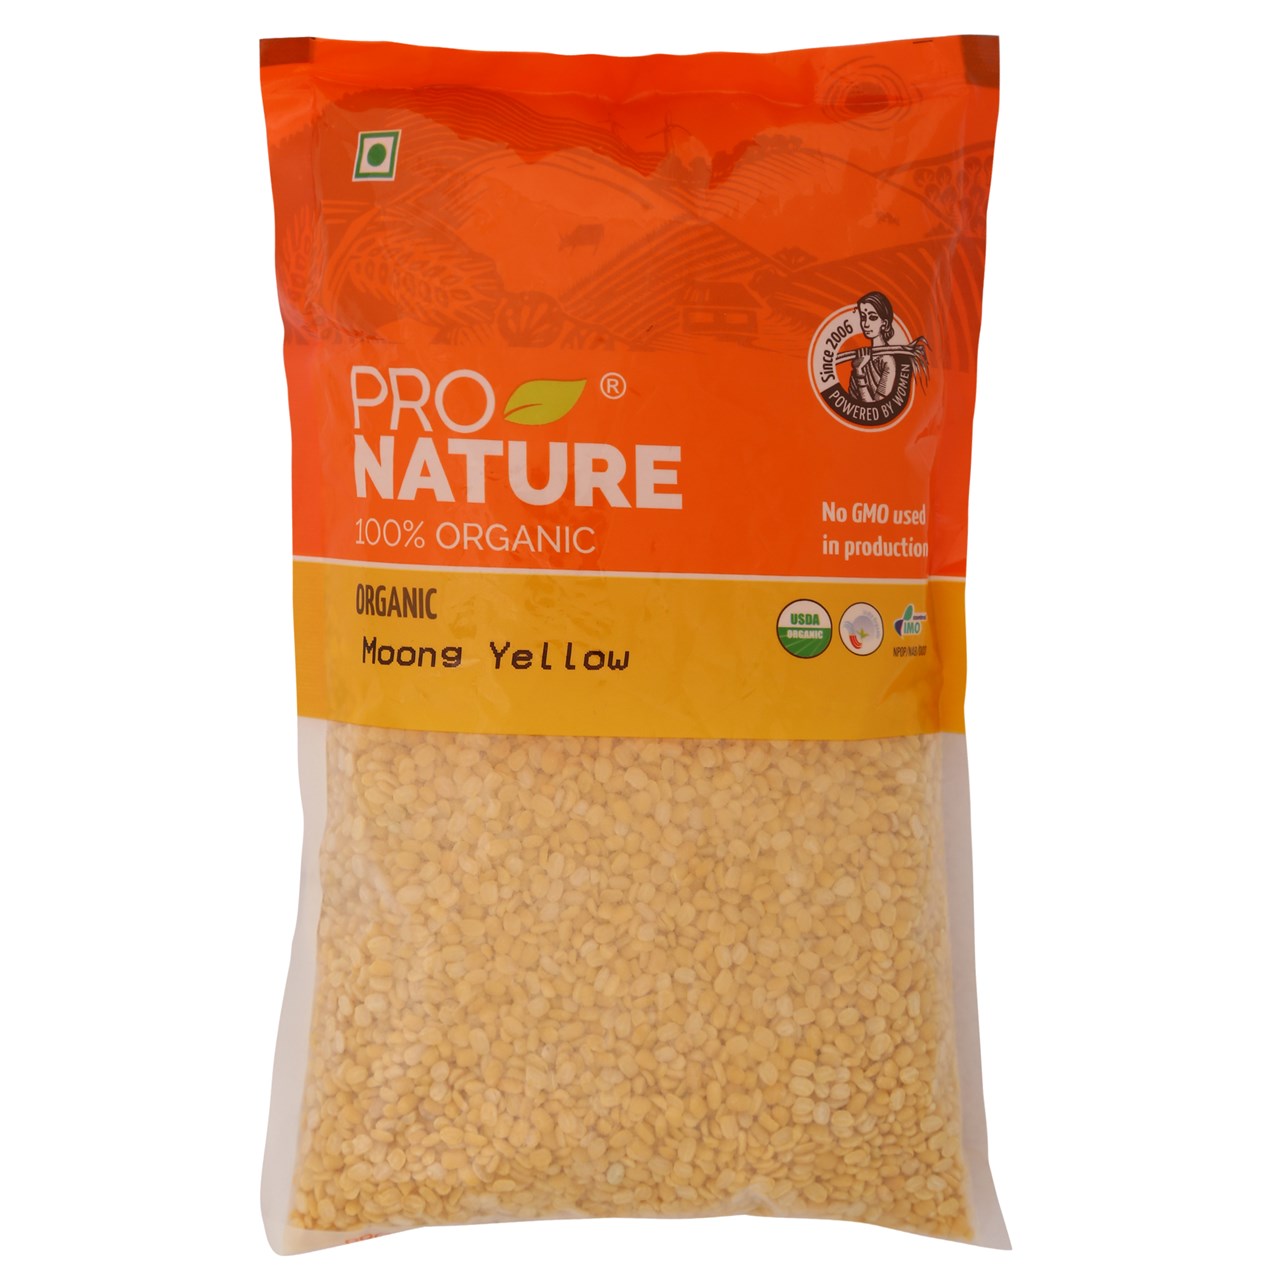 Picture of  Pro Nature 100% Organic Moong Yellow 500g